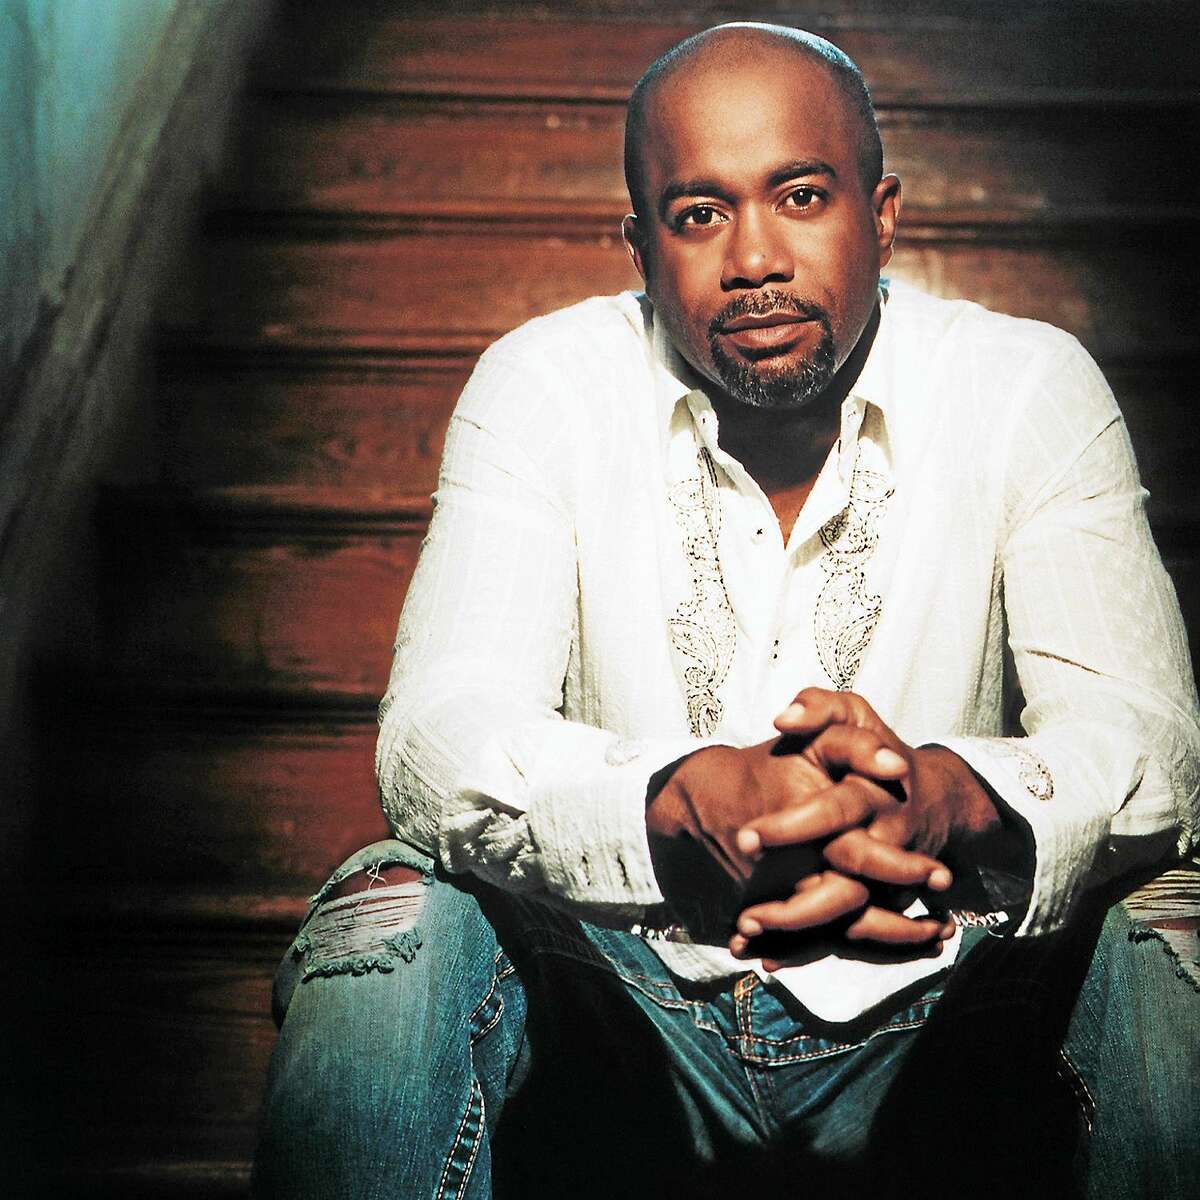 Photo courtesy of Darius Rucker Grammy award winning Country music star, Darius Rucker is set to perform ìliveî in concert at the The Big E on Sunday, Sept. 14, at 7:30 p.m.